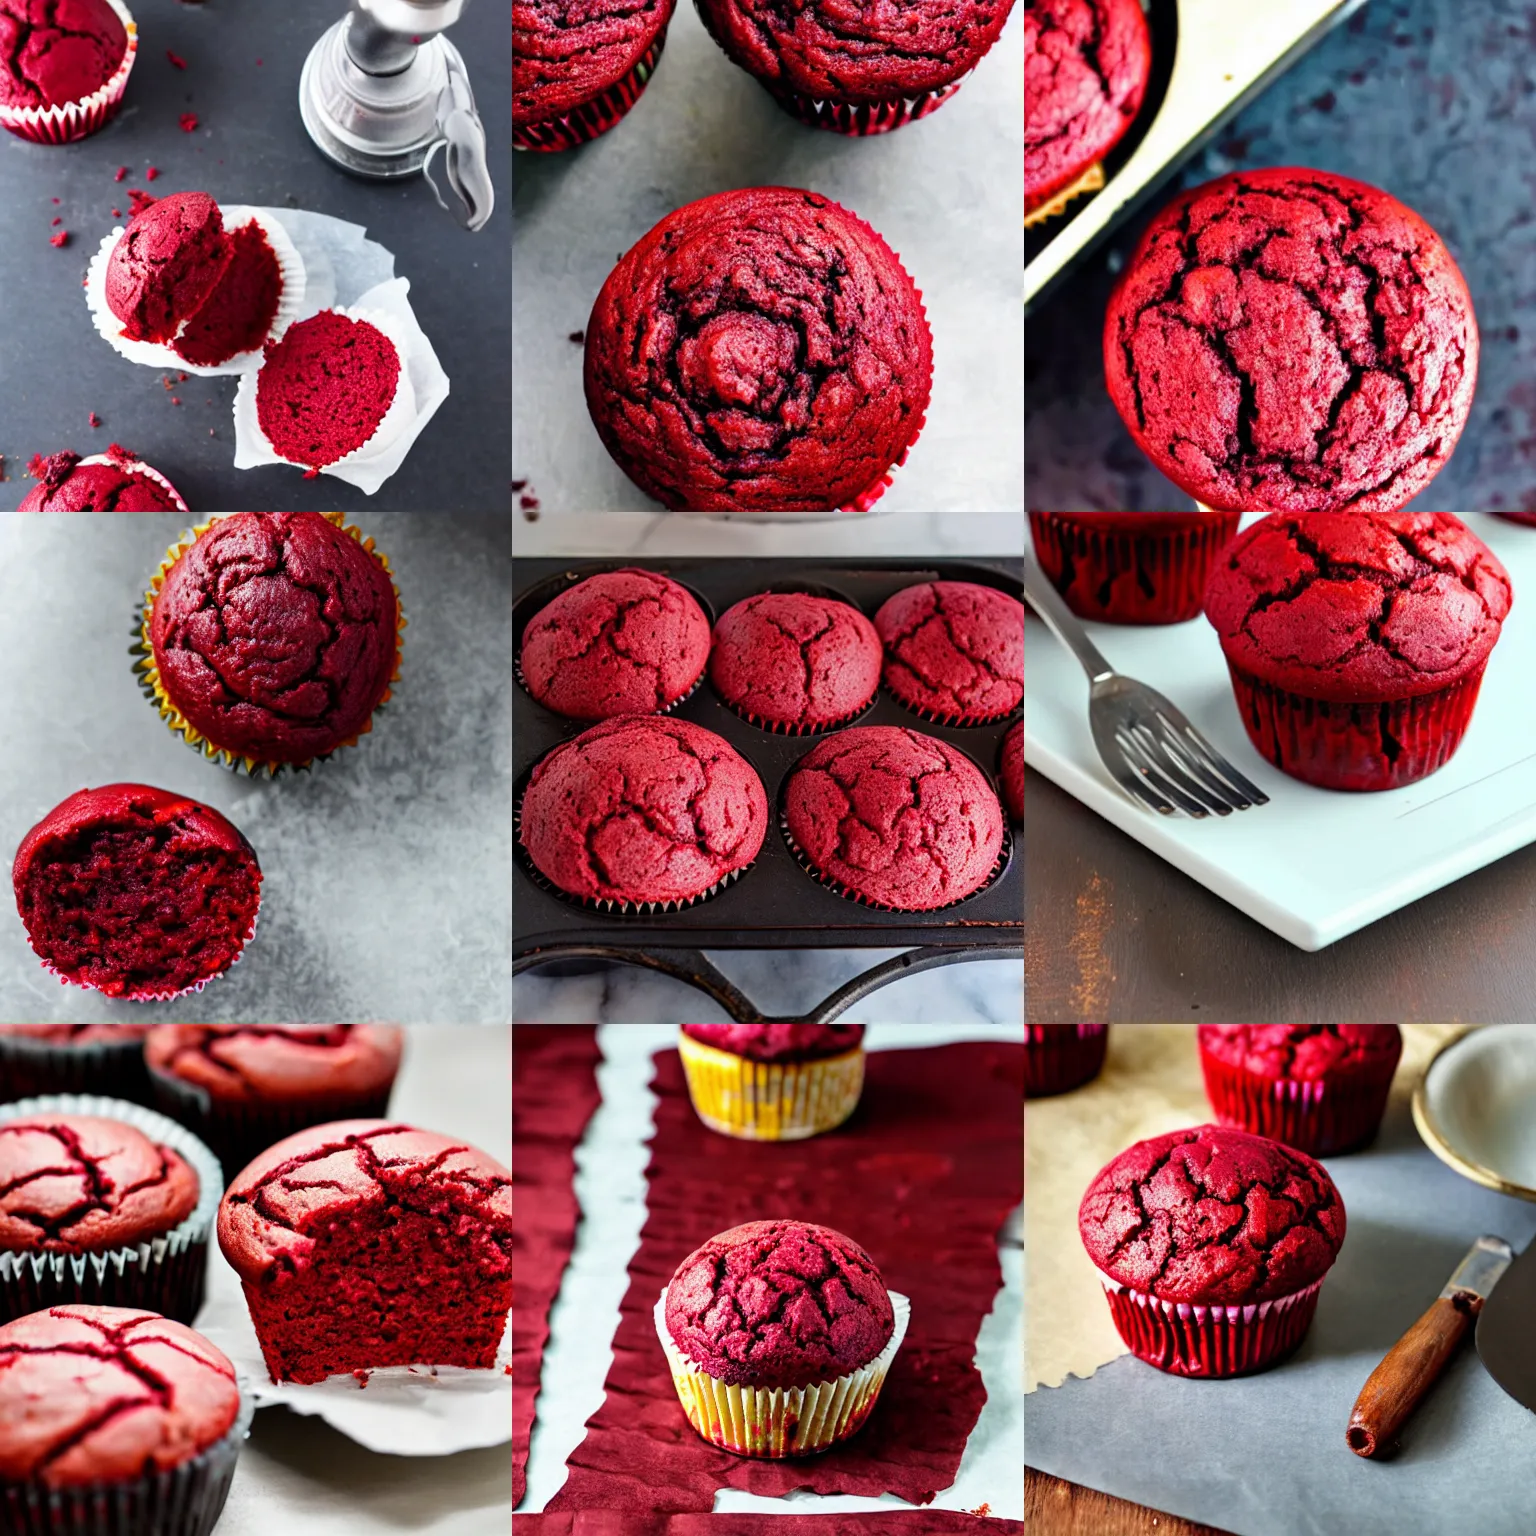 Prompt: a red velvet muffin baked way too long